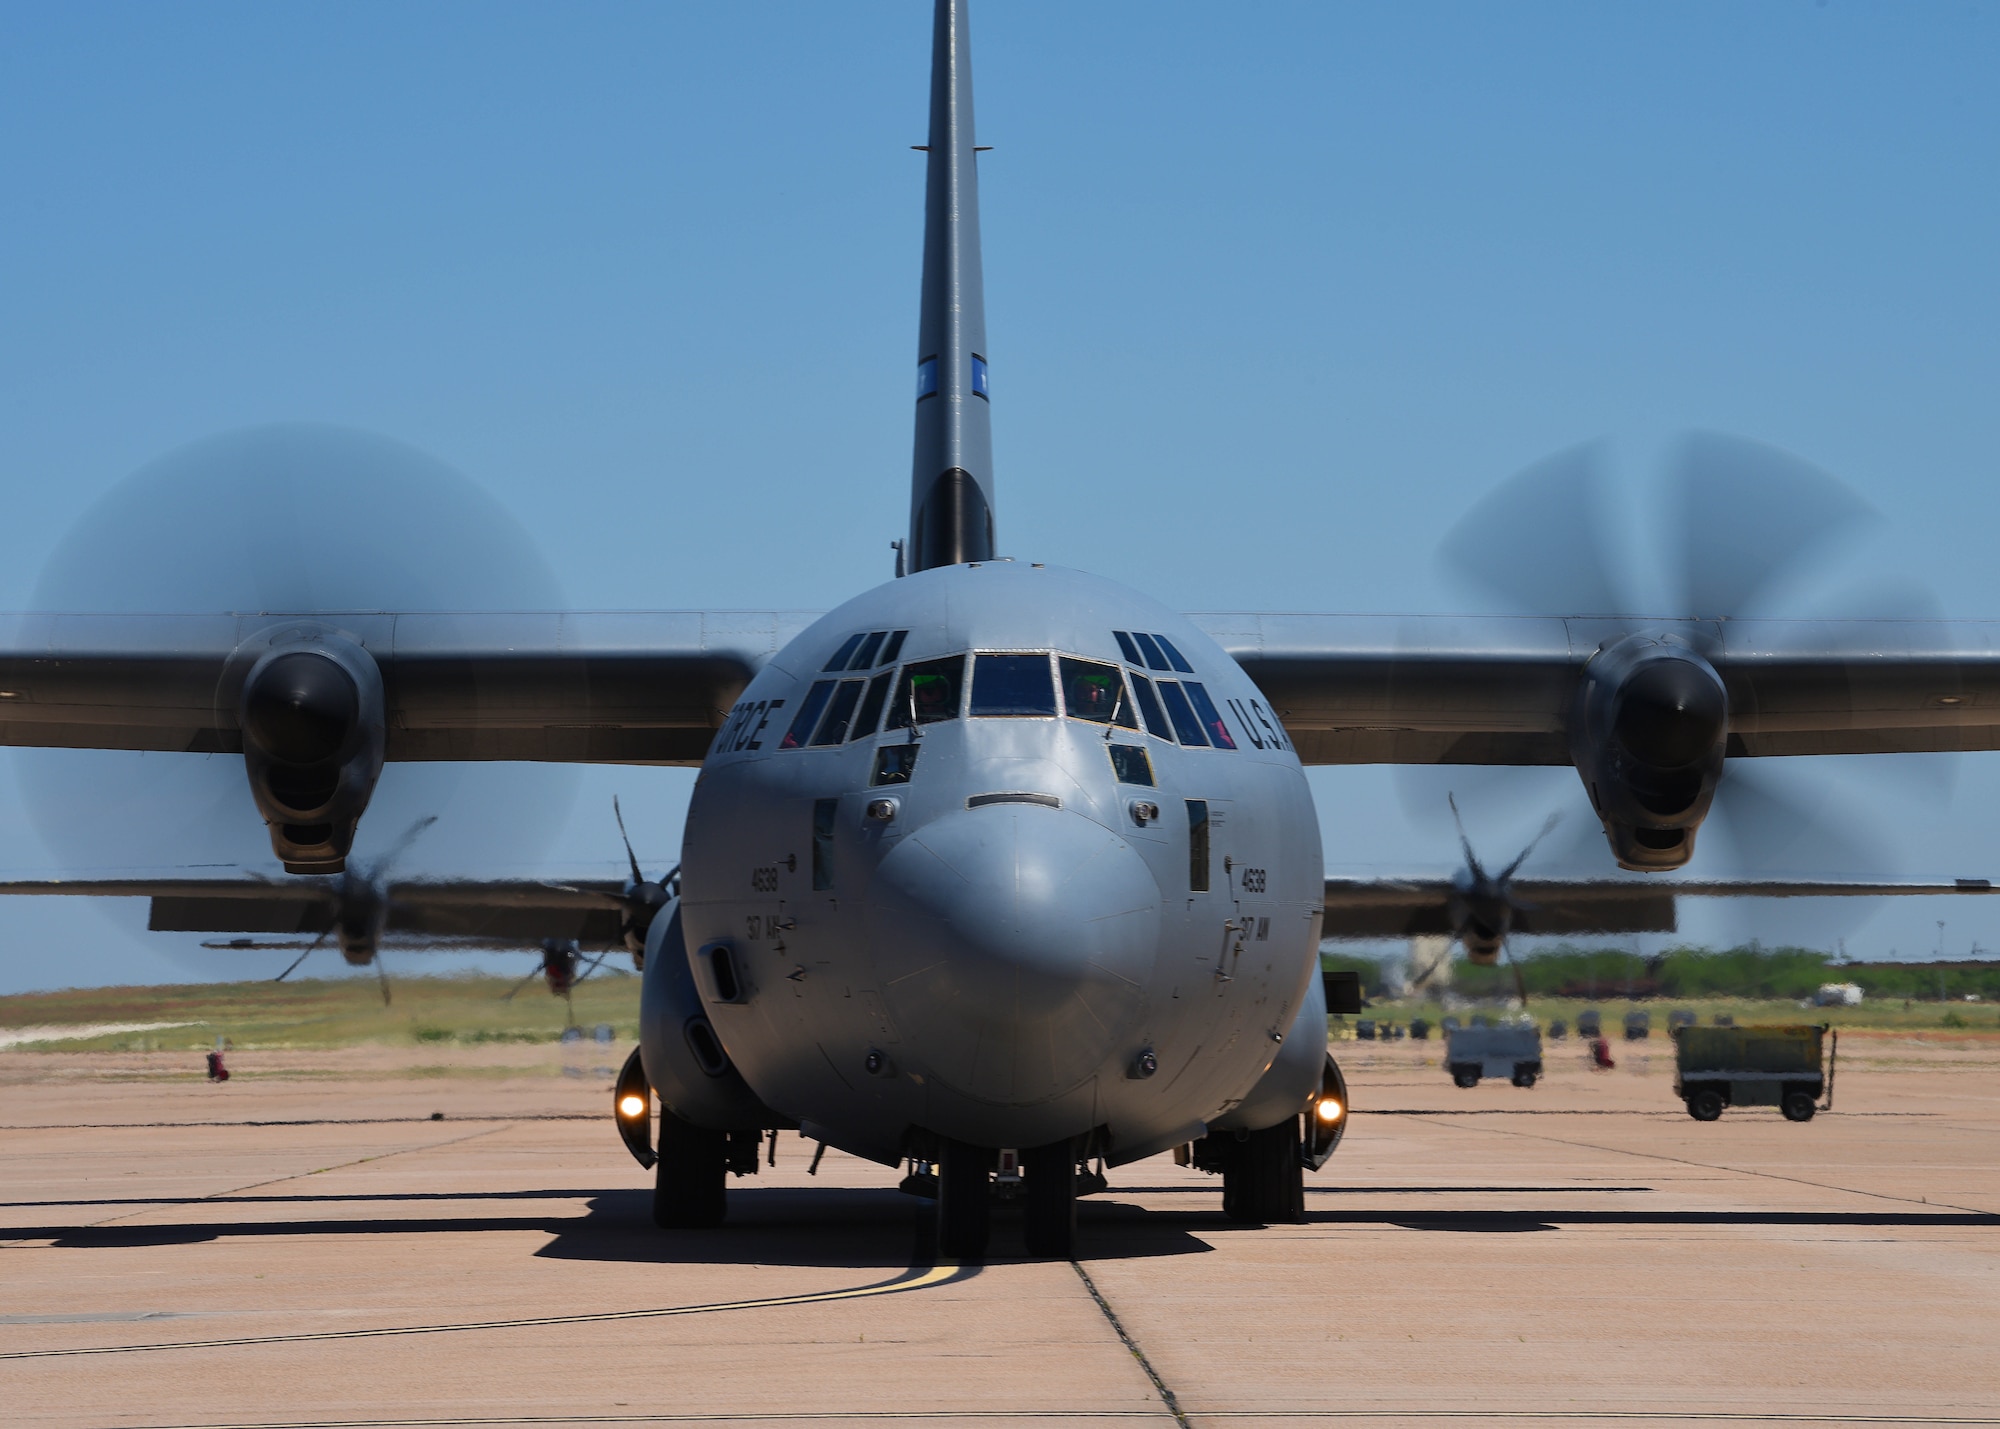 A C-130J Super Hercules prepares to depart Dyess Air Force Base, Texas, to participate in the U.S. Air Force Weapons School Joint Forcible Entry exercise June 6, 2020. The JFE exercise takes place at Nellis AFB, Nev. and is designed to be a large-scale air drop and land mobility mission. (U.S. Air Force photo by Senior Airman Mercedes Porter)